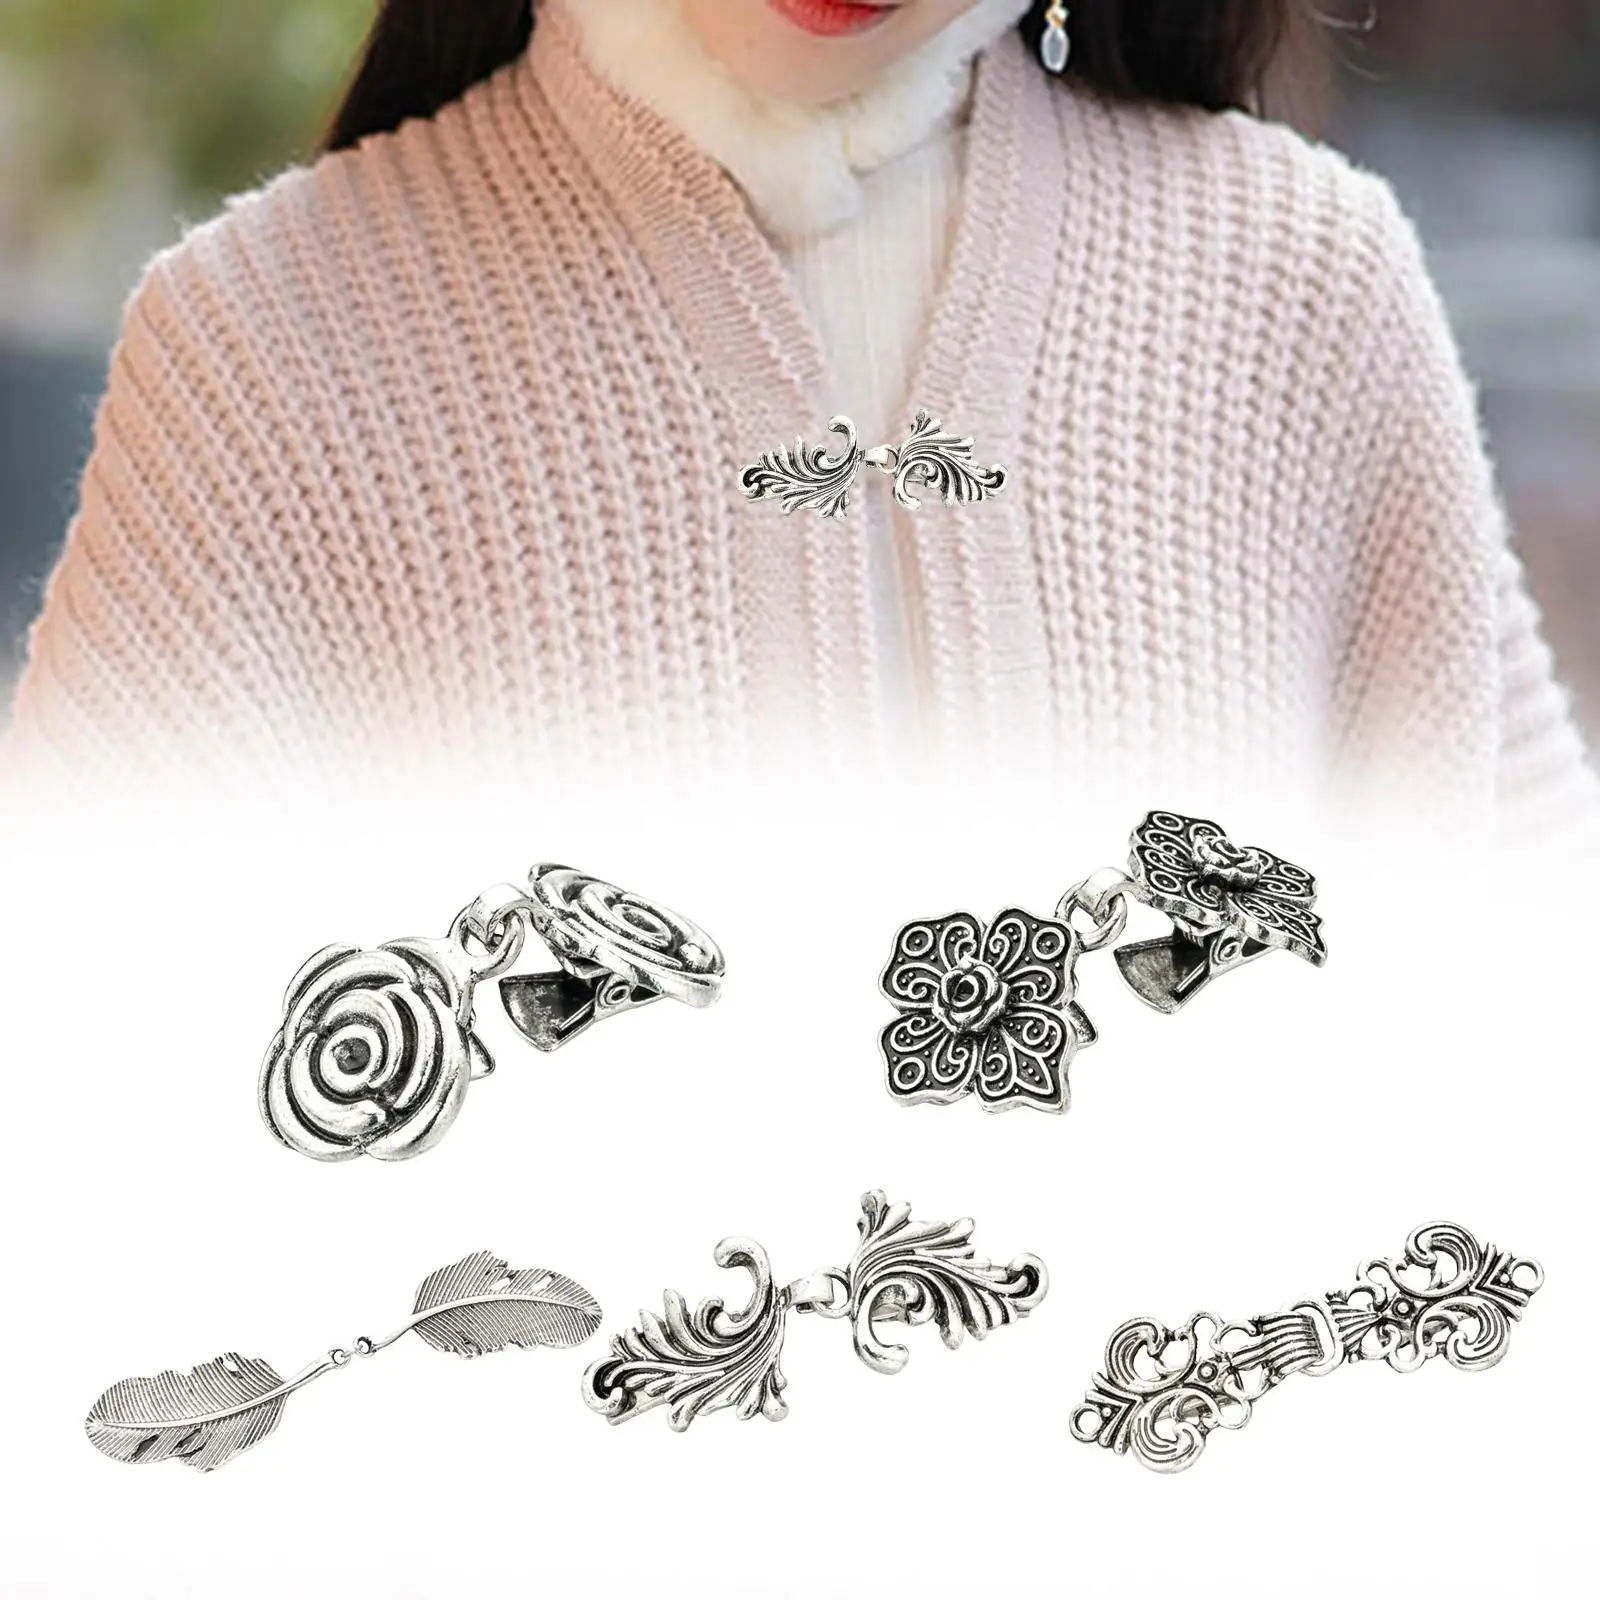 5 Pieces Sweater Brooch Clip Decor Shirt Brooch Clips Fashion Alloy Cardigan Clasp for Cloak Clothes Collar Scarf Girls wearing